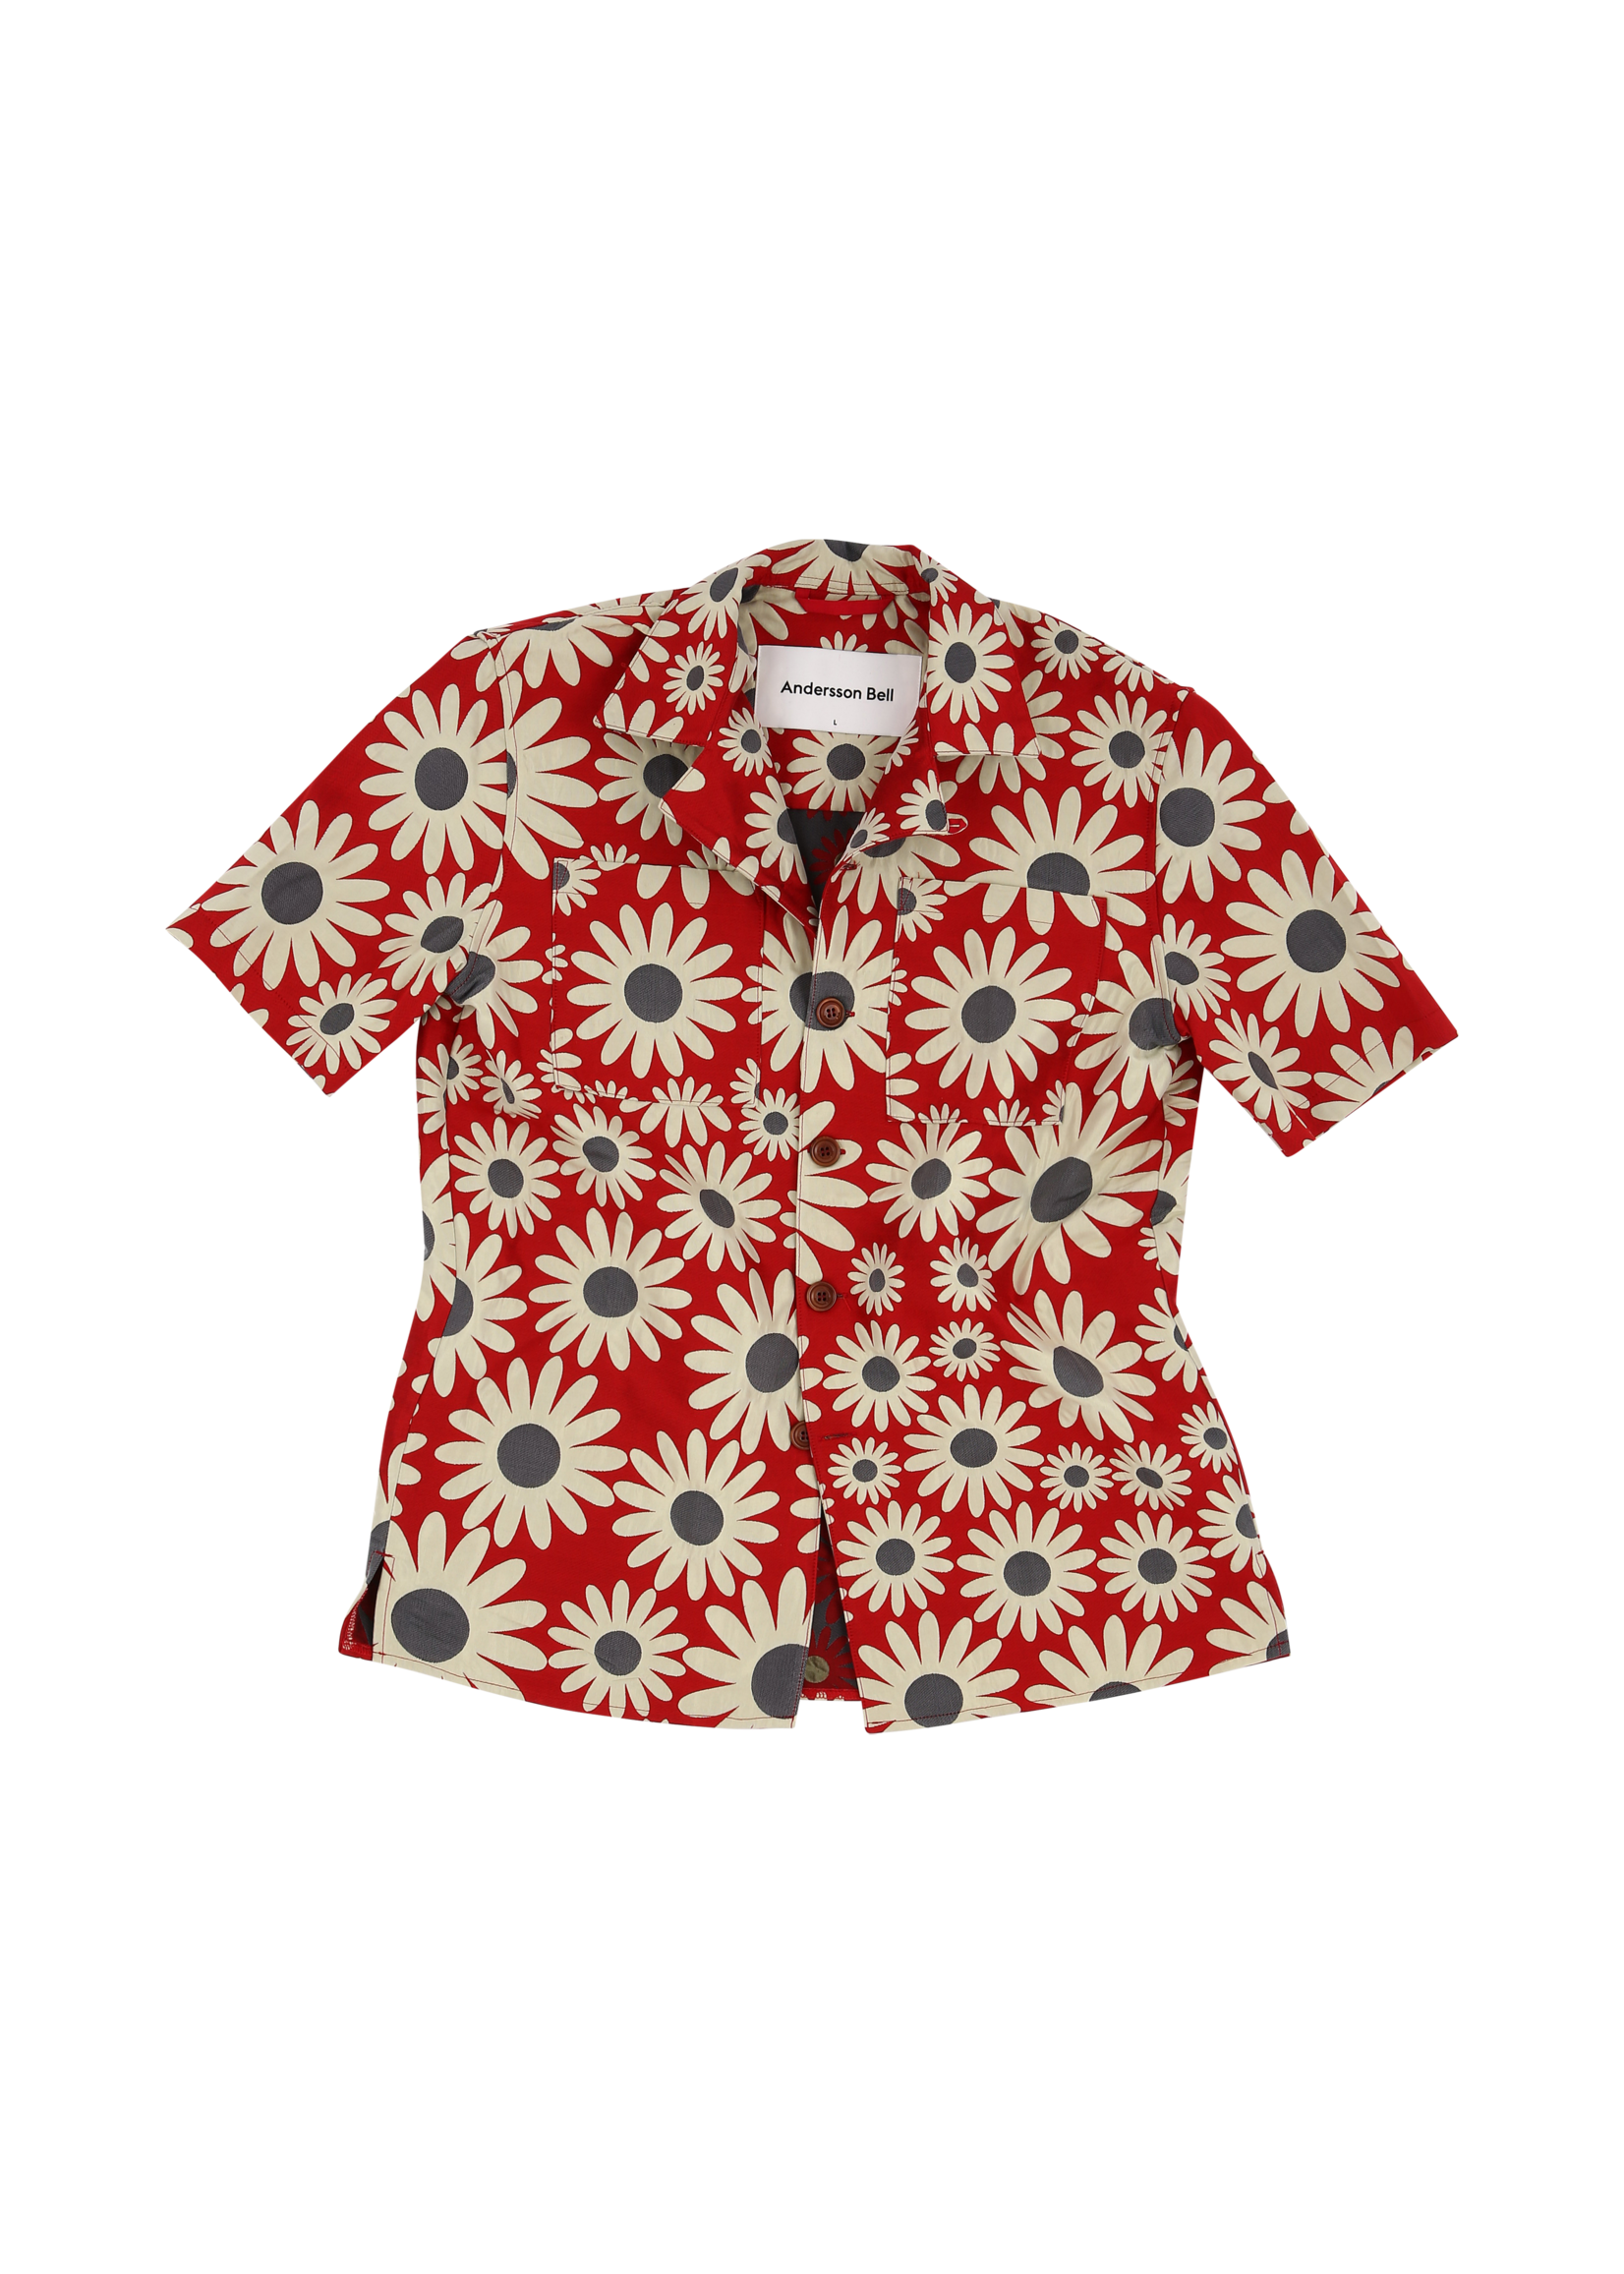 ANDERSSON BELL Daisy Jacquard Shirt in Red